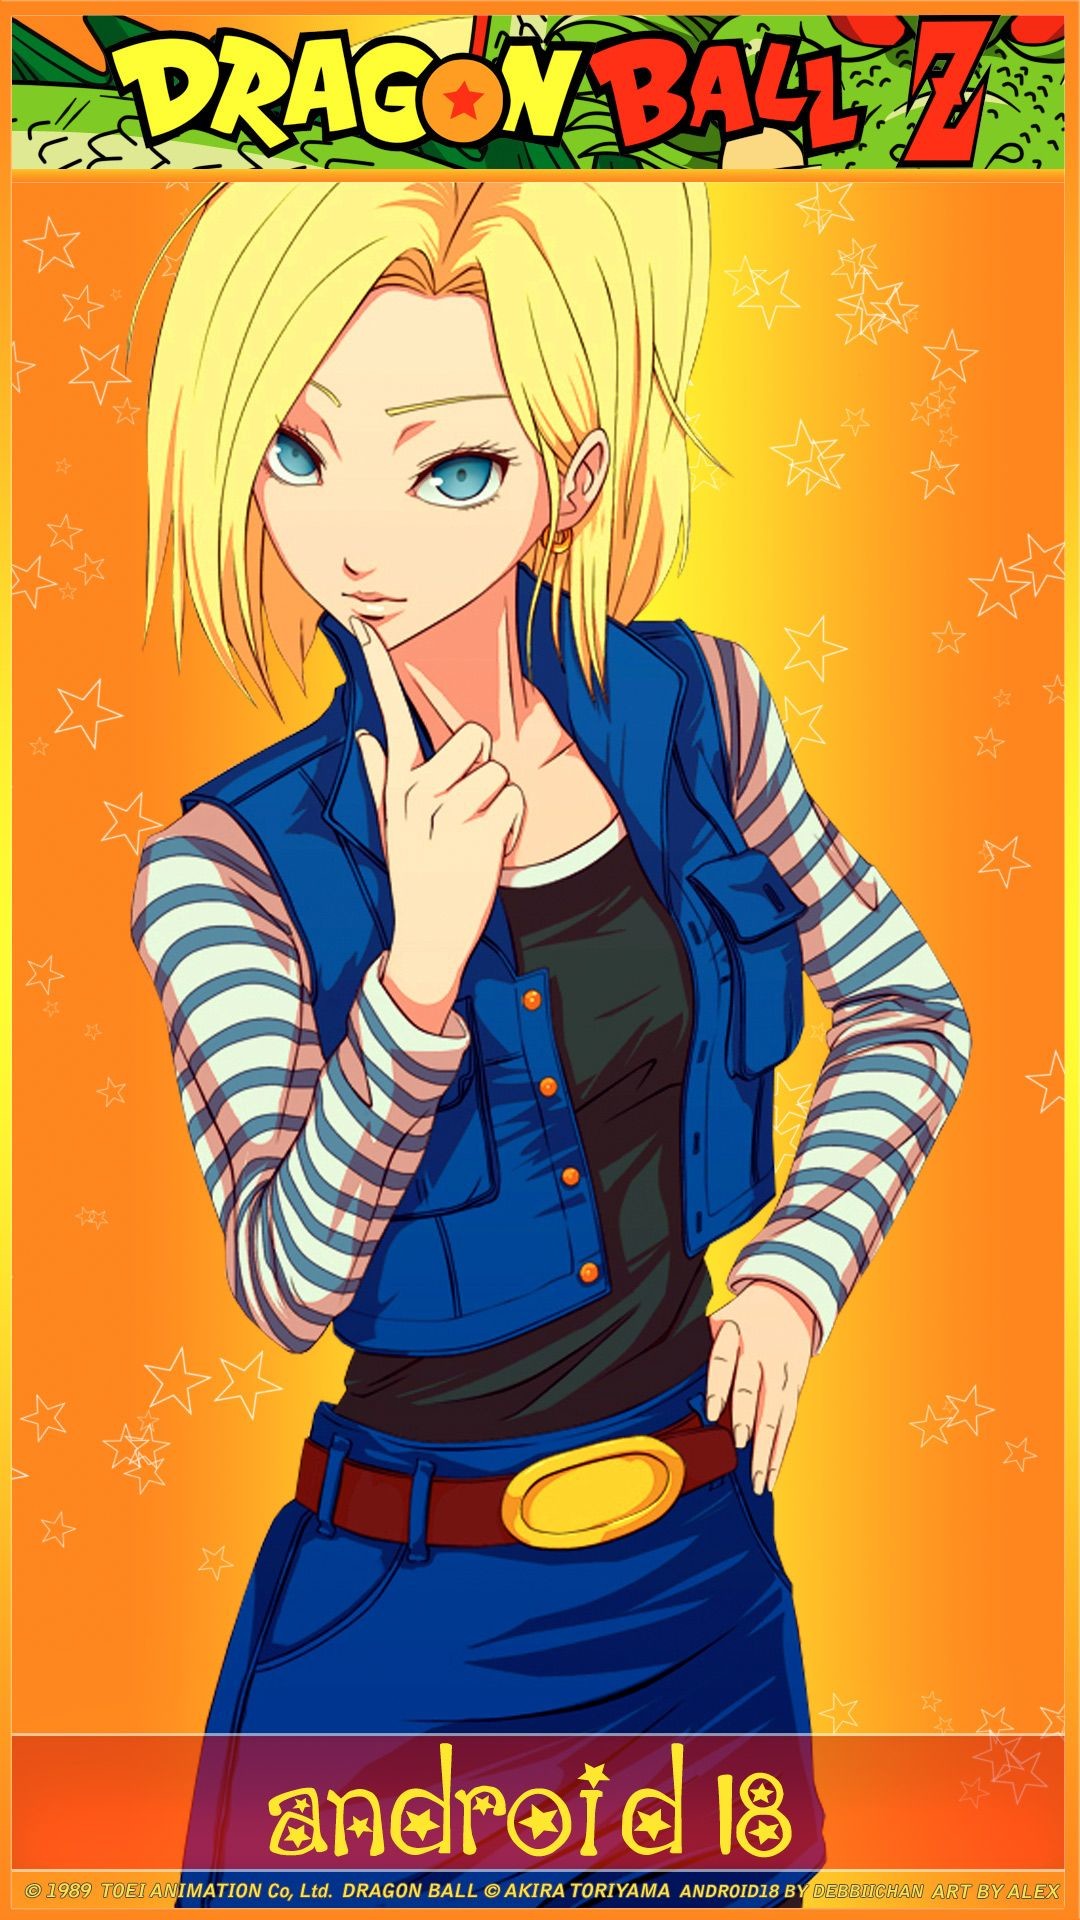 1080x1920 Dragon Ball Z Android 18 Anime iPhone Wallpapers | Free Computer .